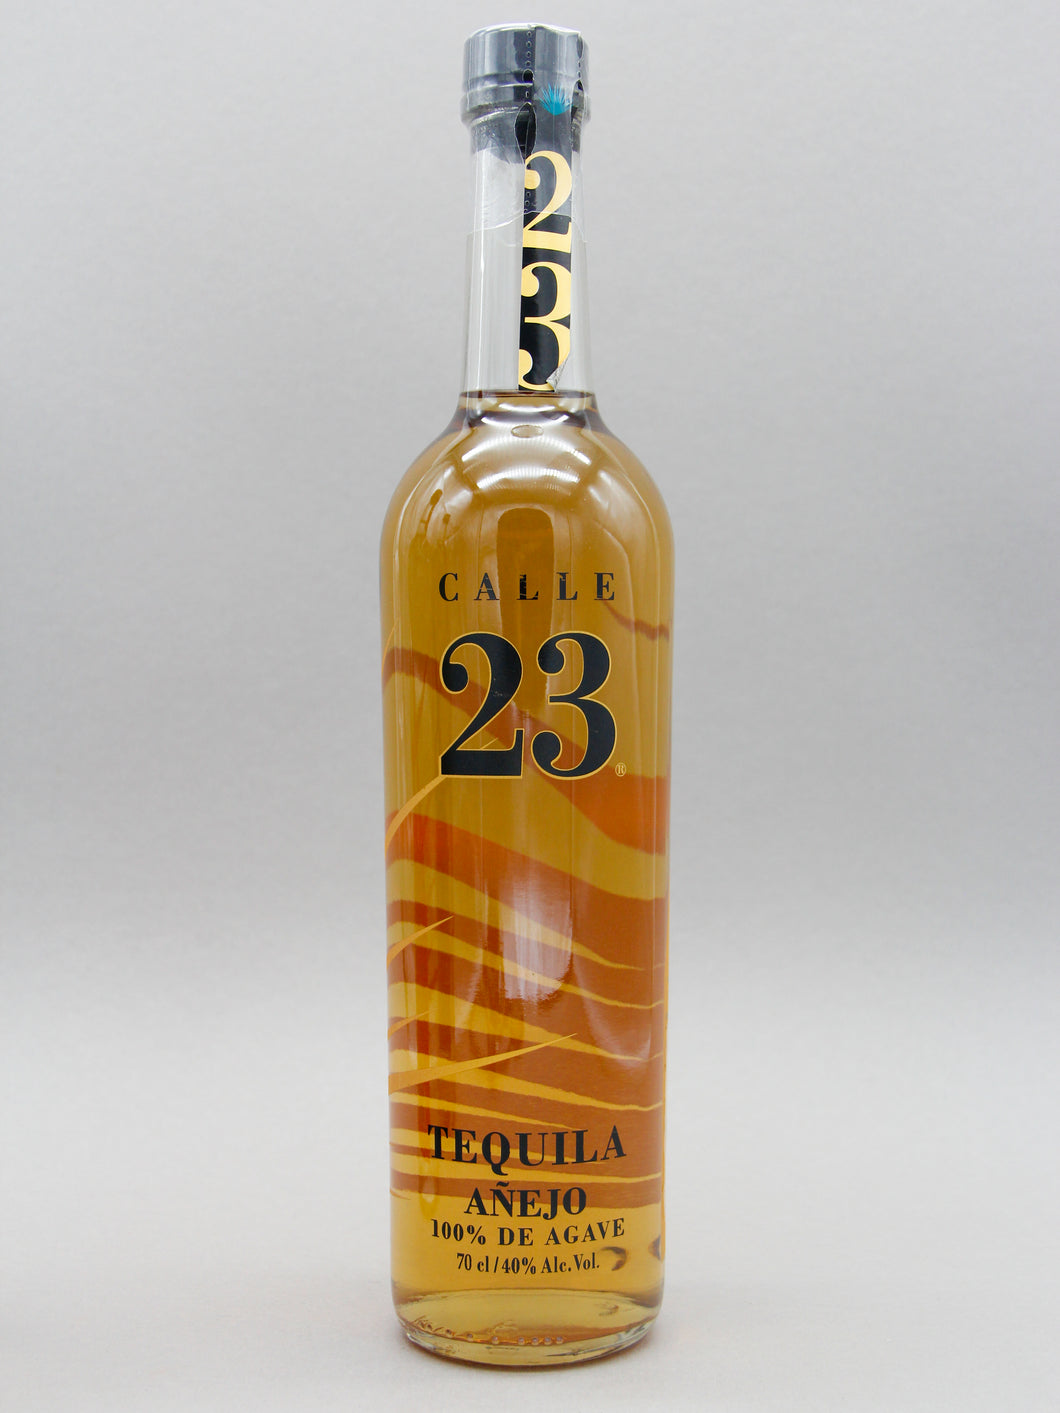 Calle 23 Anejo Tequila, 100% Agave (40%, 70cl)